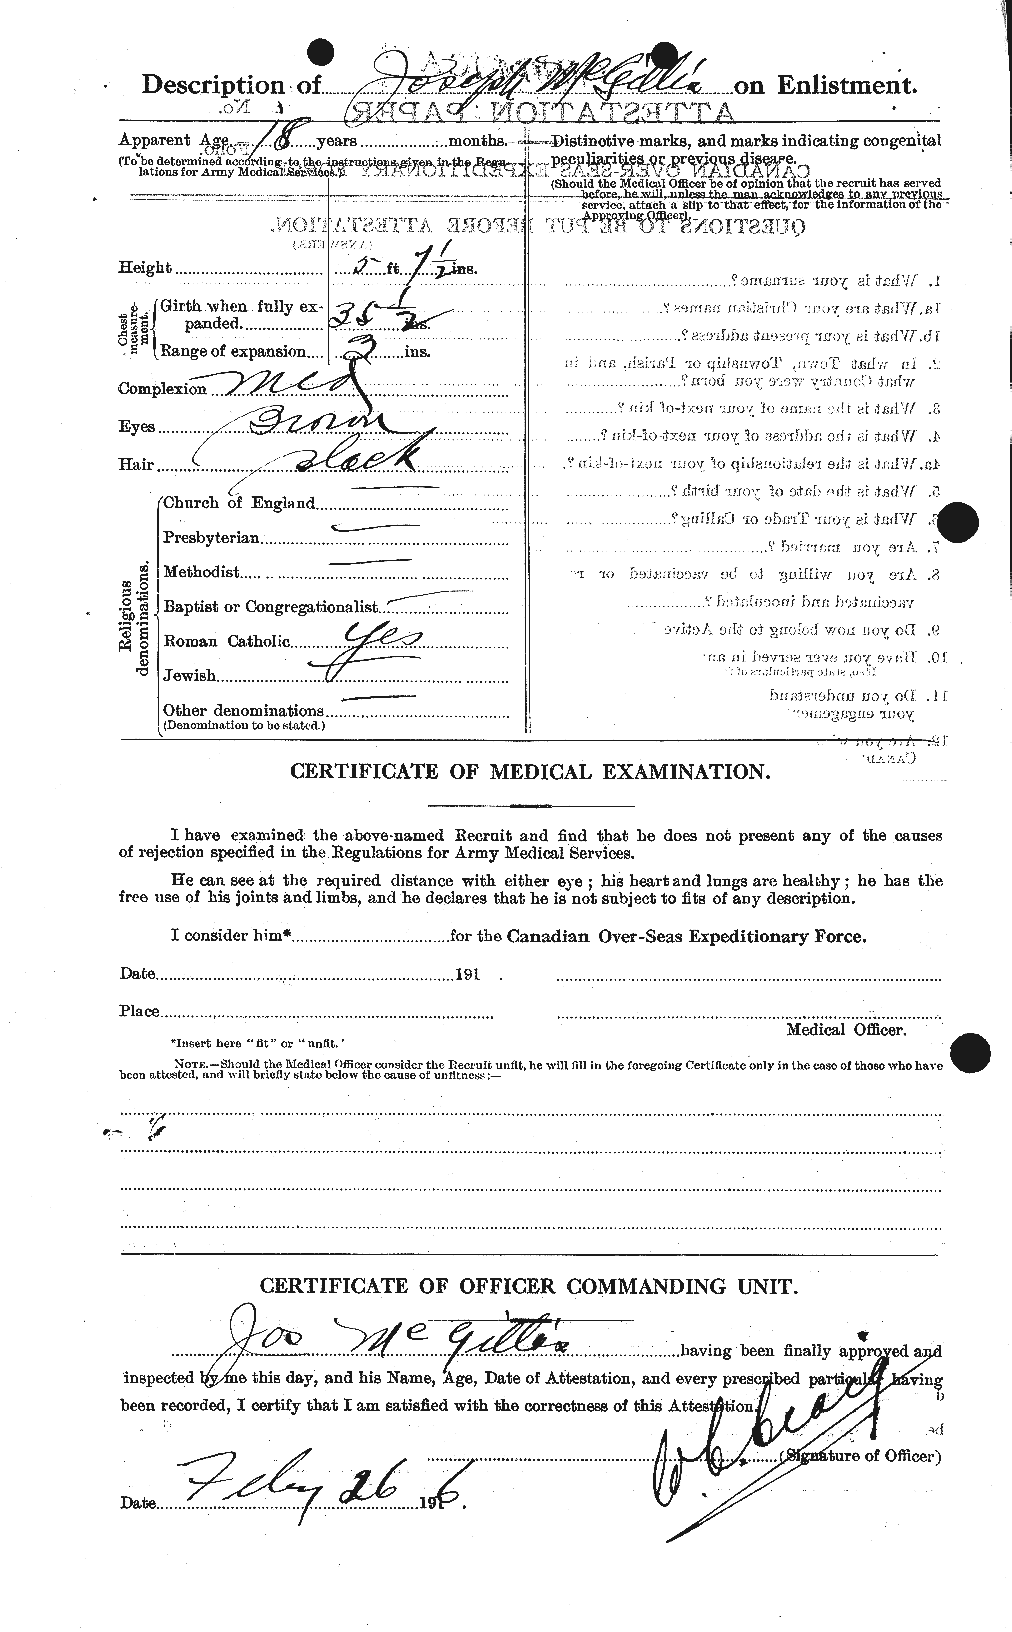 Personnel Records of the First World War - CEF 523997b